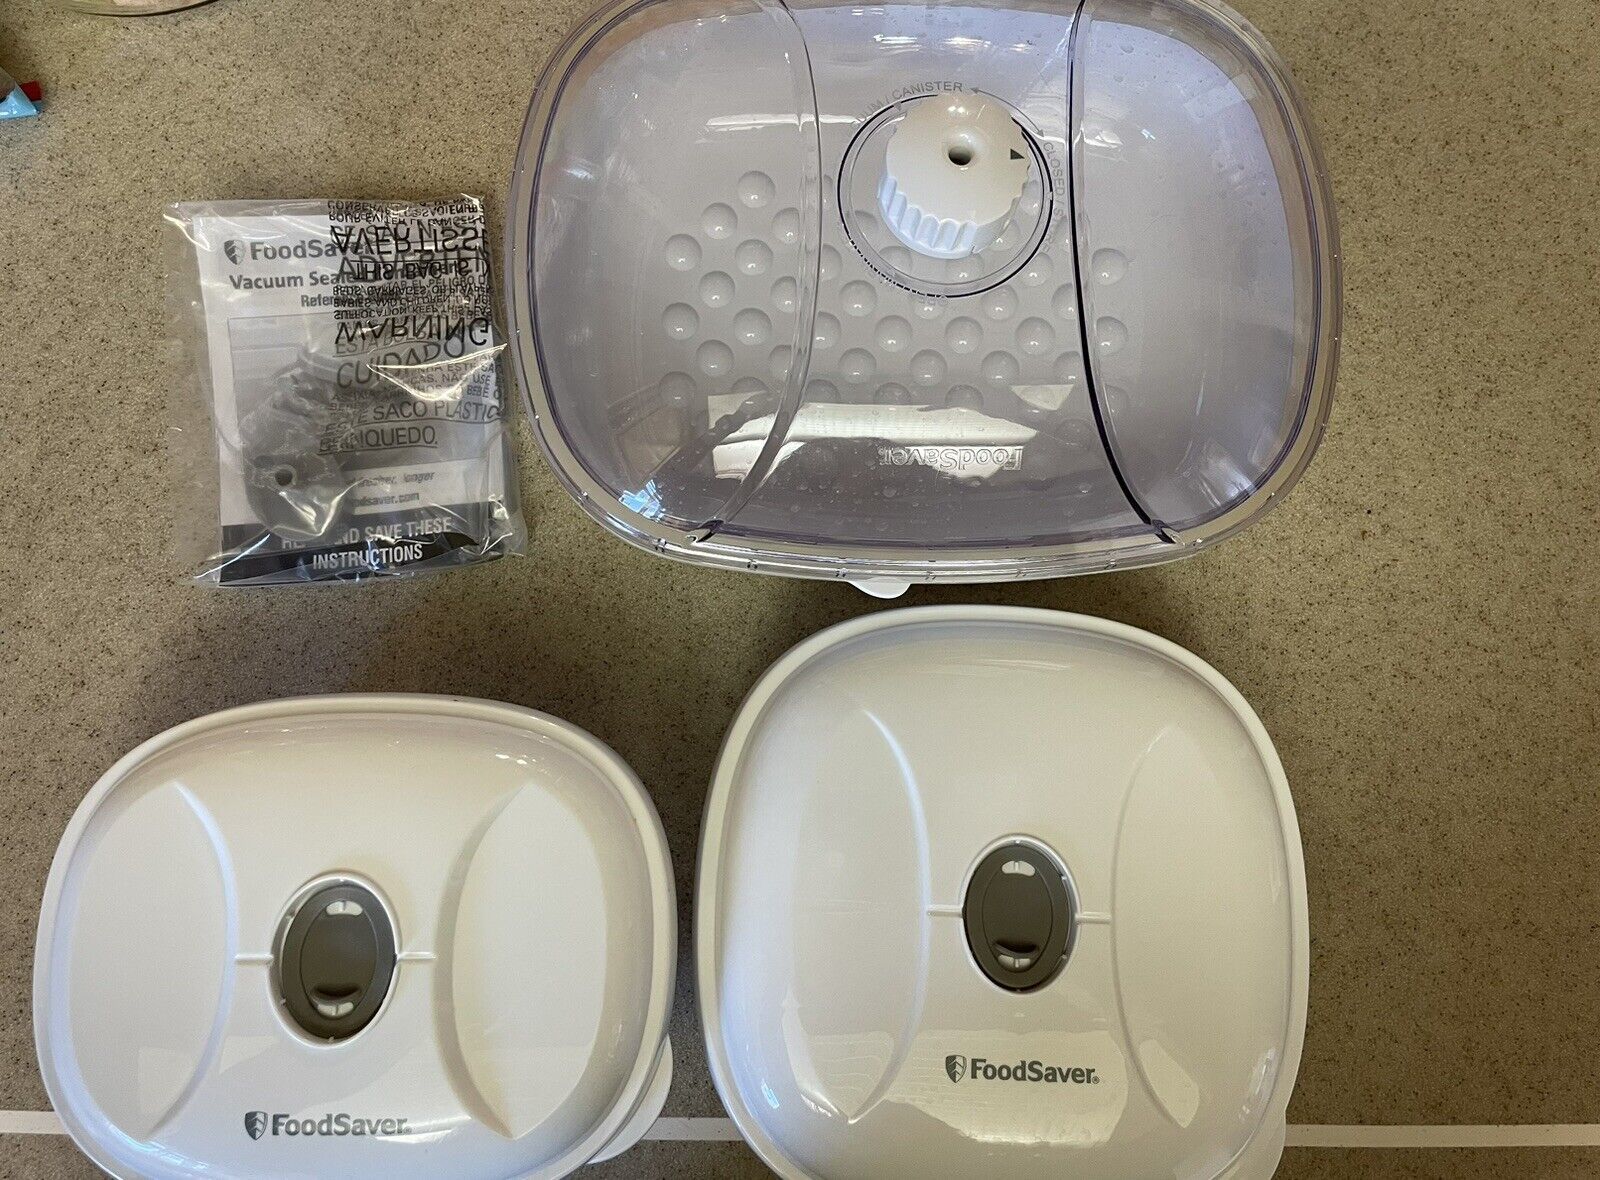 Primary image for 3 pack Foodsaver Vacuum Sealer Containers with Lids Marinating - never used